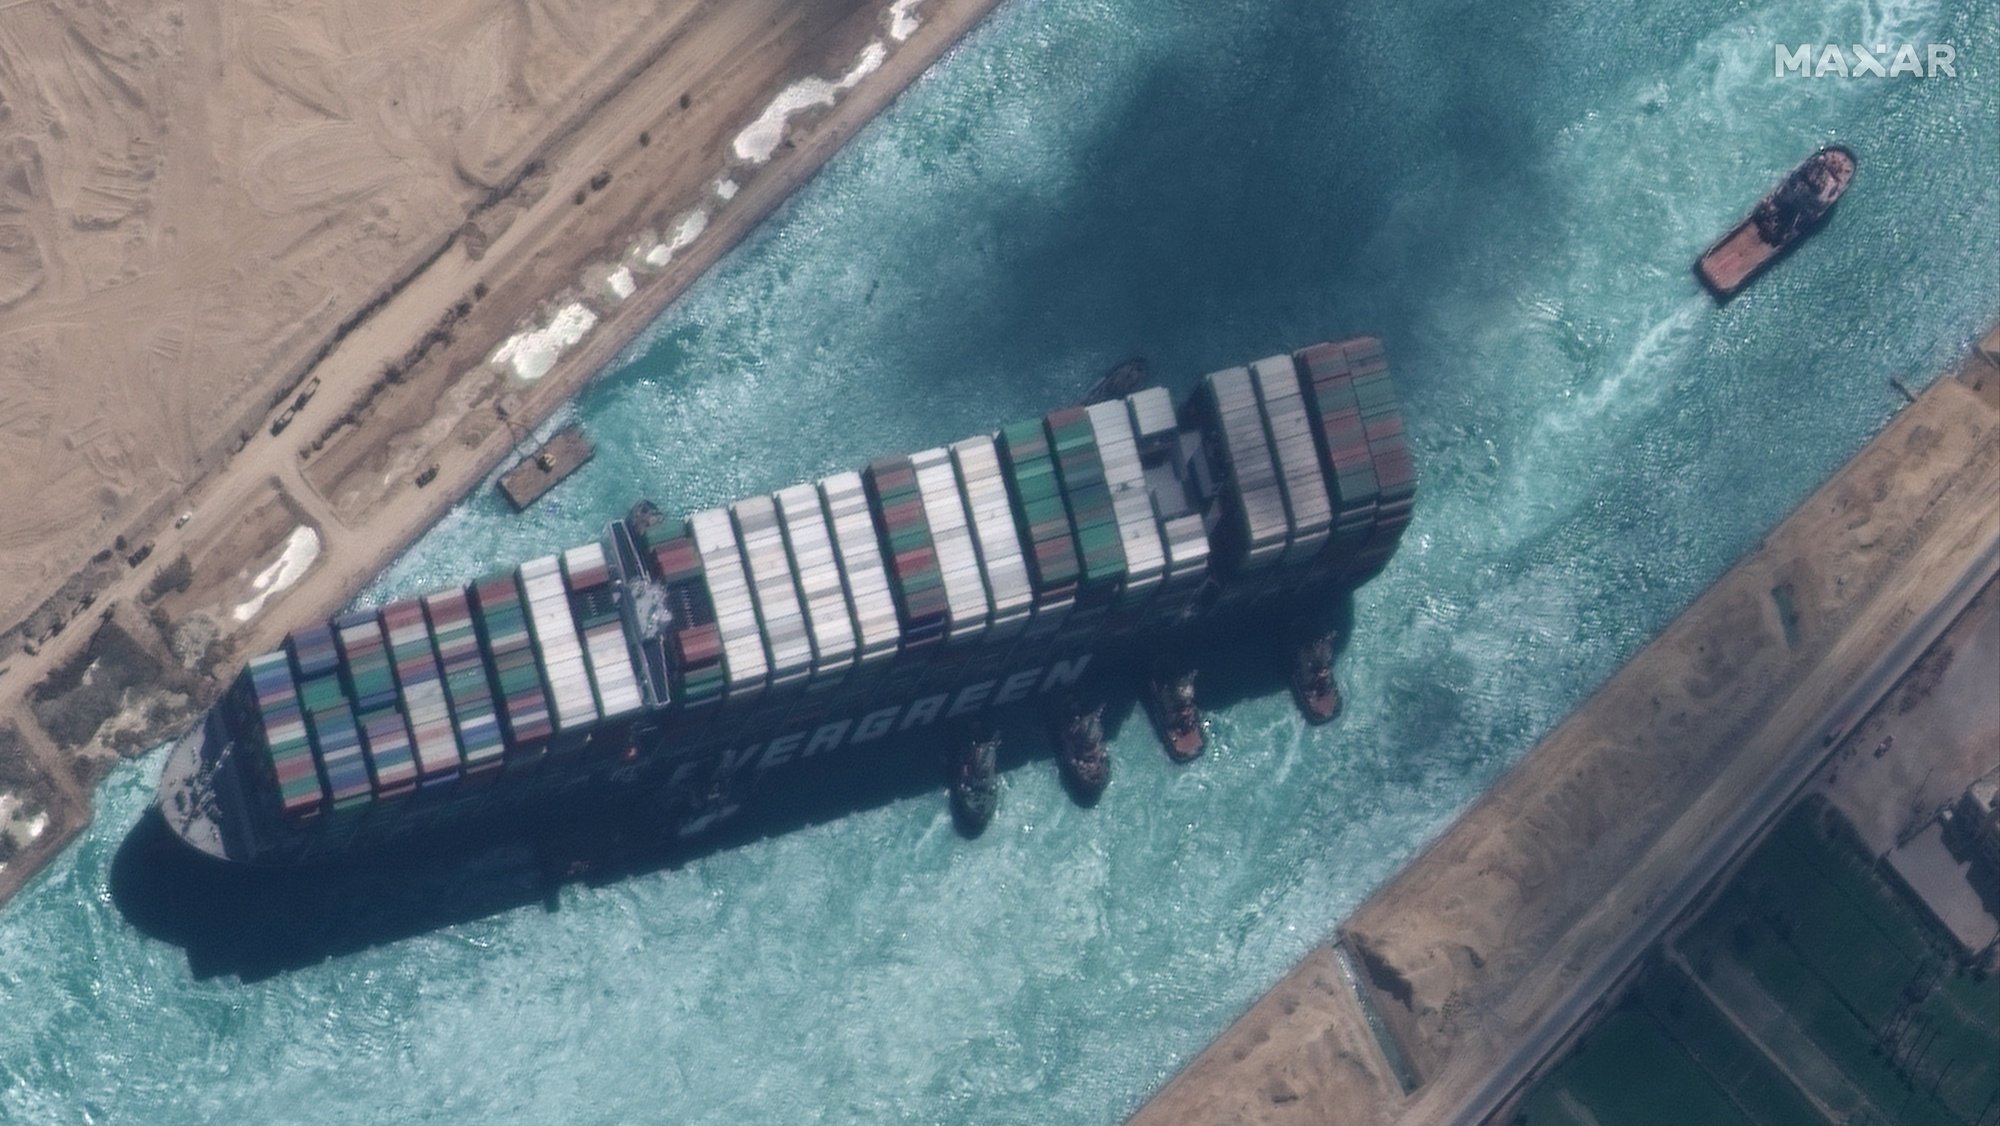 epa09105214 A handout satellite image made available by MAXAR Technologies shows , the Ever Given container ship after it has been moved away from the eastern bank of the canal and tugboats trying to reposition the ship, in the Suez Canal, Egypt, 29 March 2021. The head of the Suez Canal Authority announced on 29 March that the large container ship, which ran aground in the Suez Canal on 23 March, is now free floating after responding to the pulling maneuvers.  EPA/MAXAR TECHNOLOGIES HANDOUT MANDATORY CREDIT: SATELLITE IMAGE 2020 MAXAR TECHNOLOGIES -- the watermark may not be removed/cropped -- HANDOUT EDITORIAL USE ONLY/NO SALES HANDOUT EDITORIAL USE ONLY/NO SALES